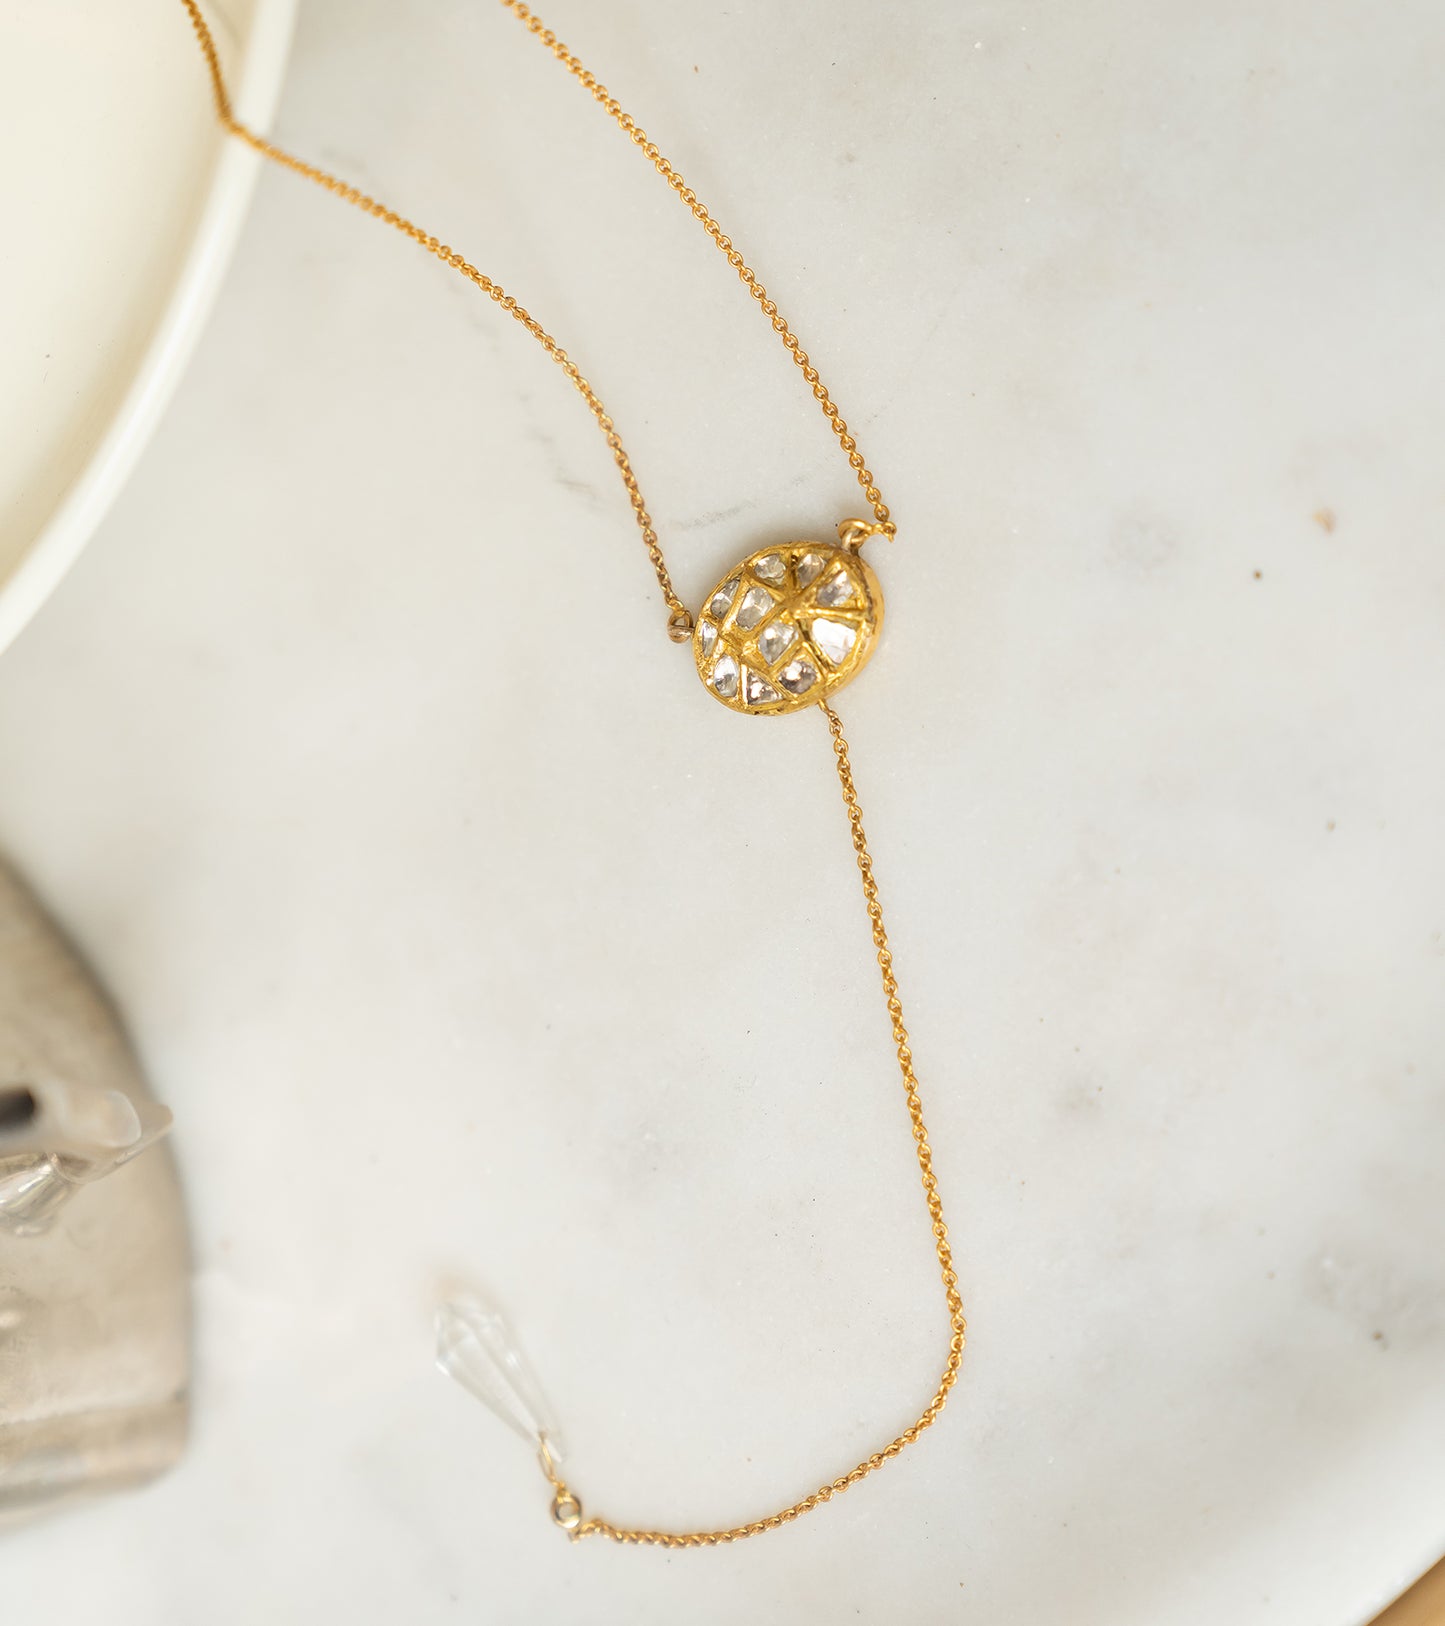 The Cerchio Oval with Crystal Dangler Necklace in Gold